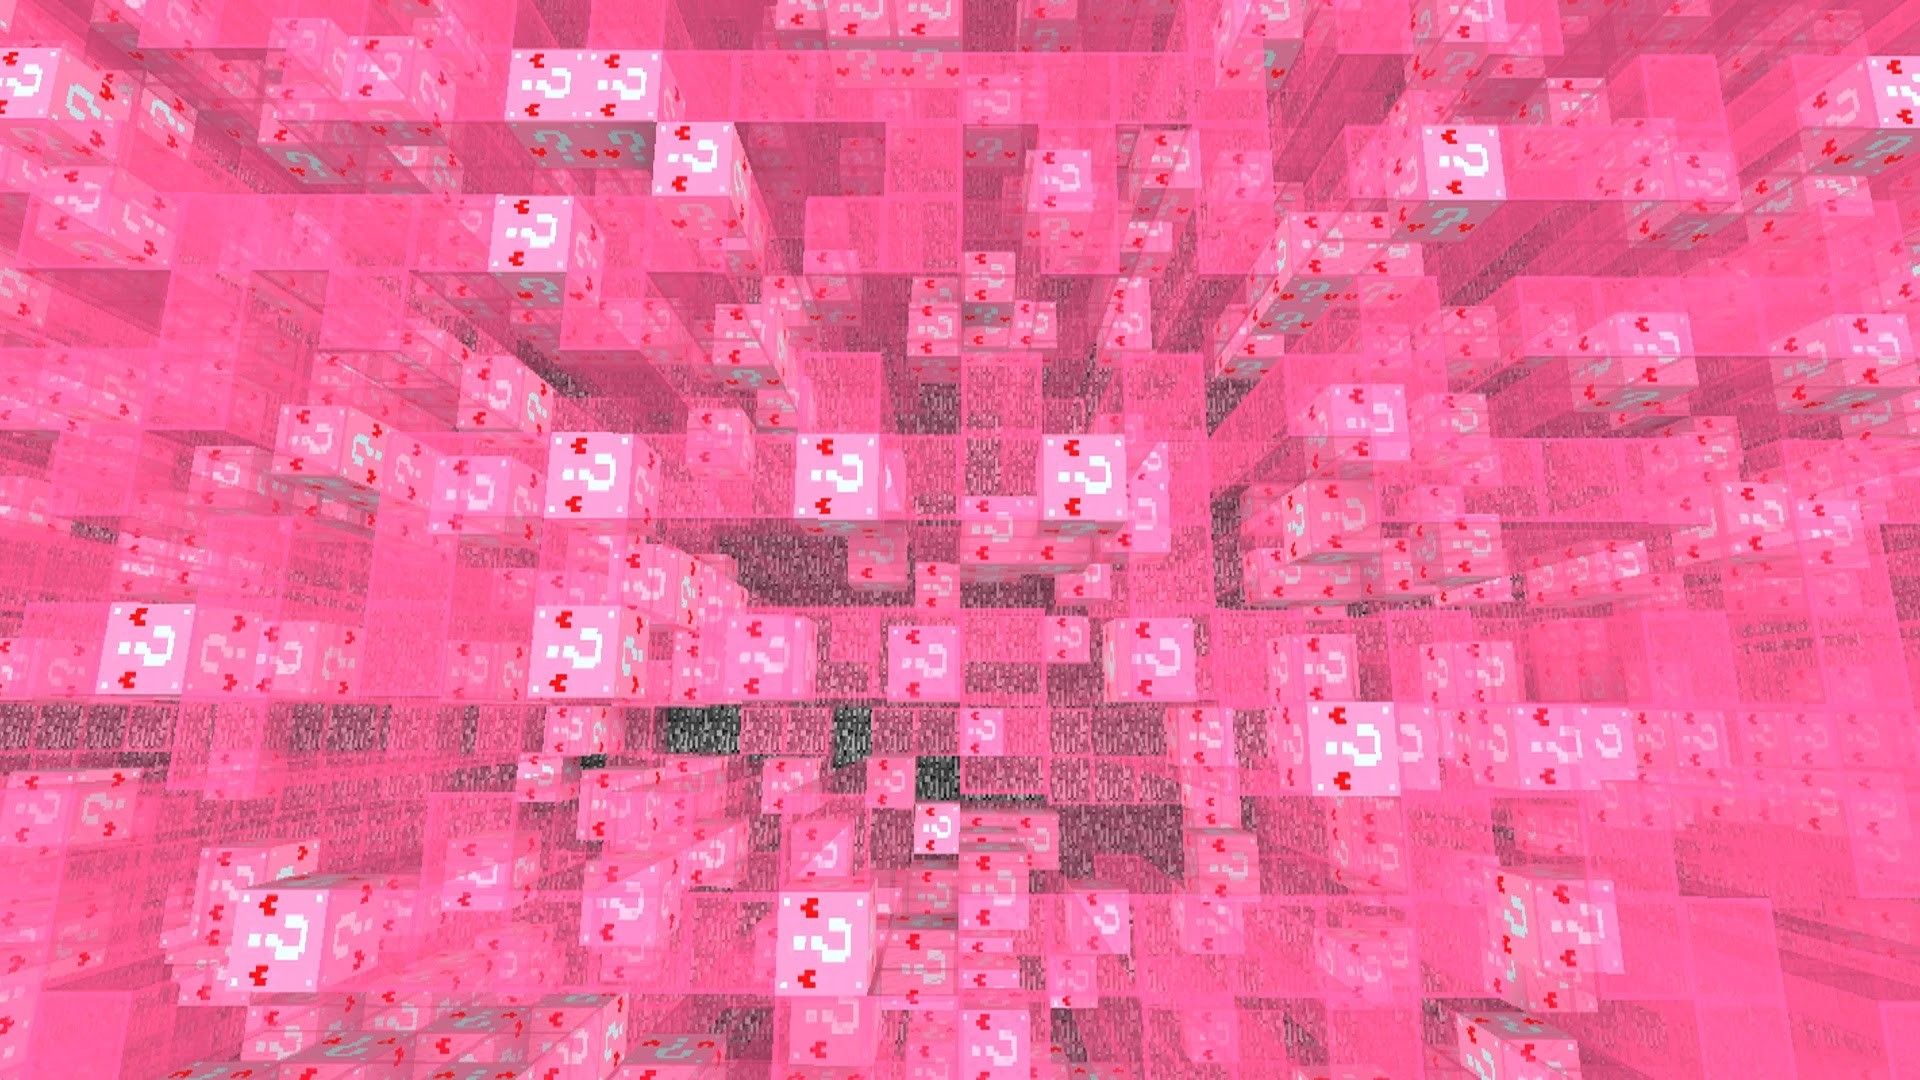 Minecraft Pink Lucky Blocks Mod For Breast Cancer Charity HD Background Wallpaper Amazing Cool Tablet Smart Phone 4k High Definition 1920x1080